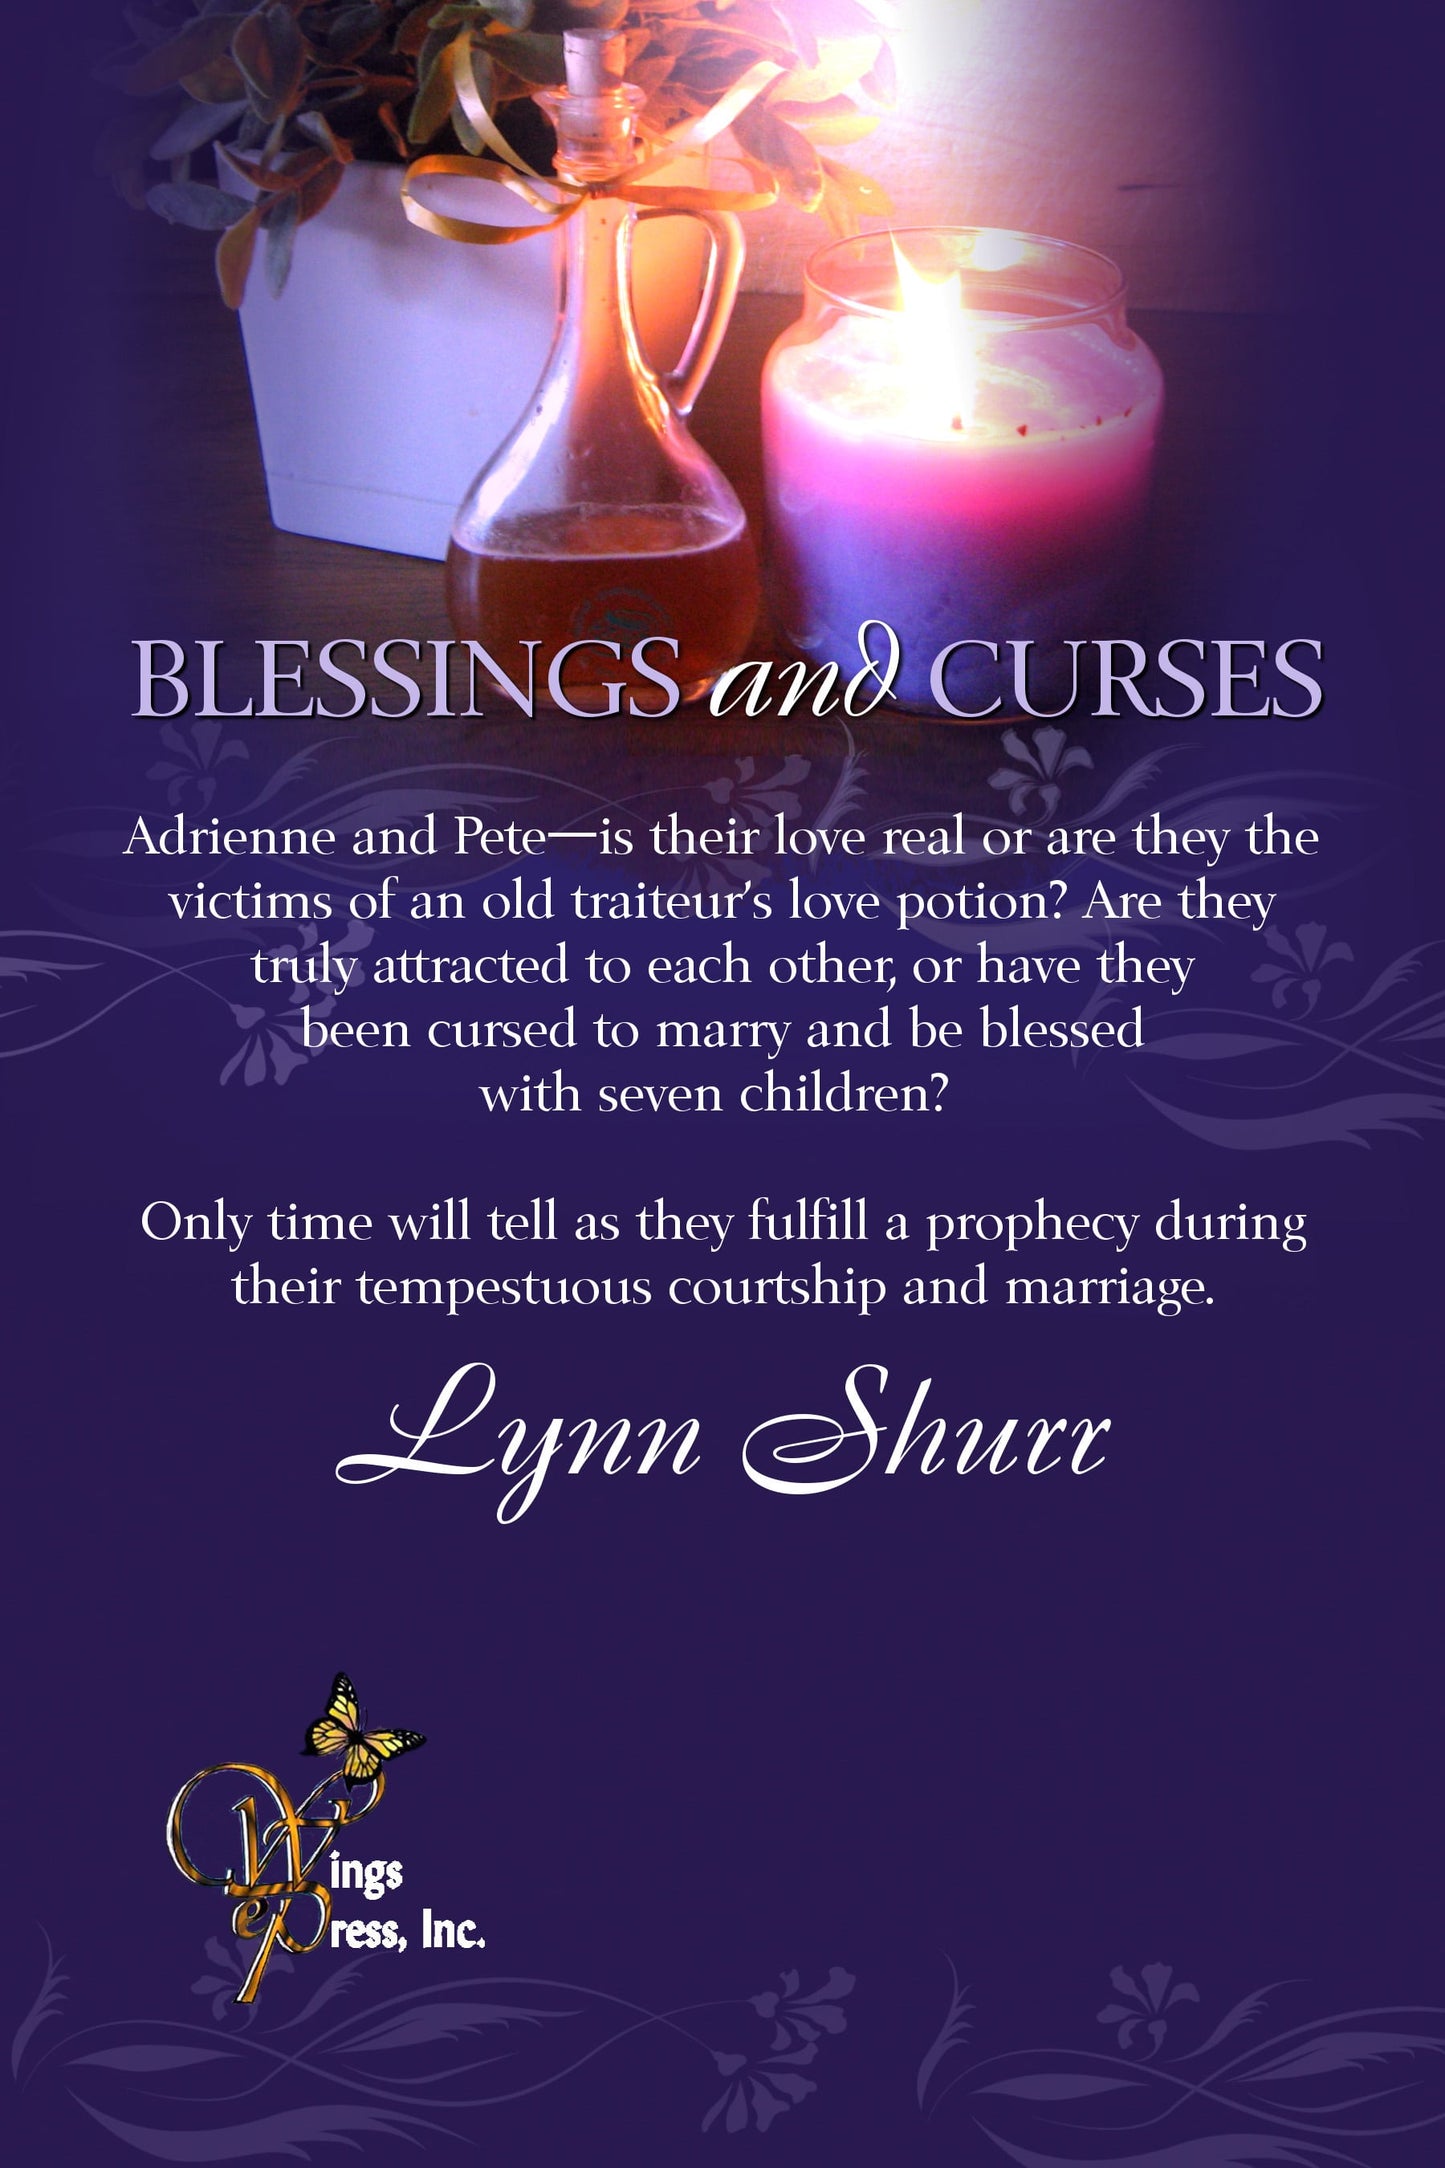 Blessings And Curses